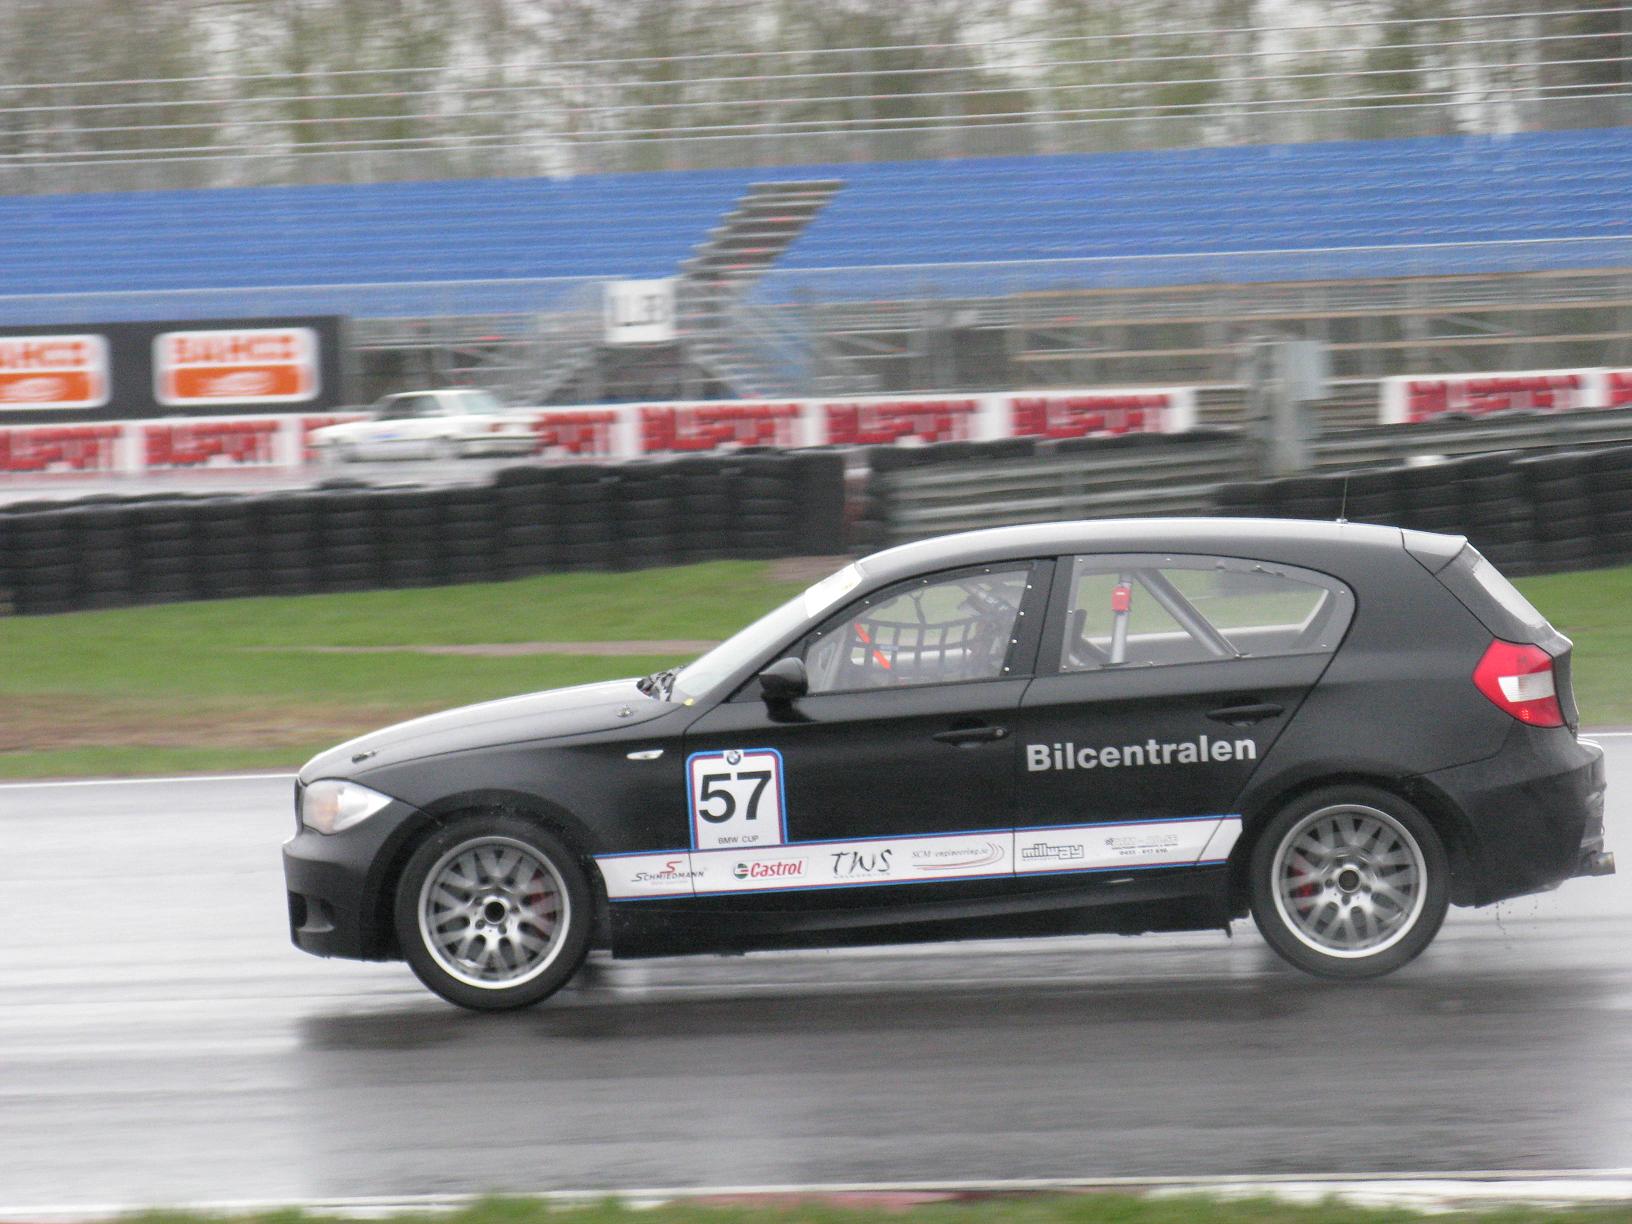 the racing car is driving on the wet track